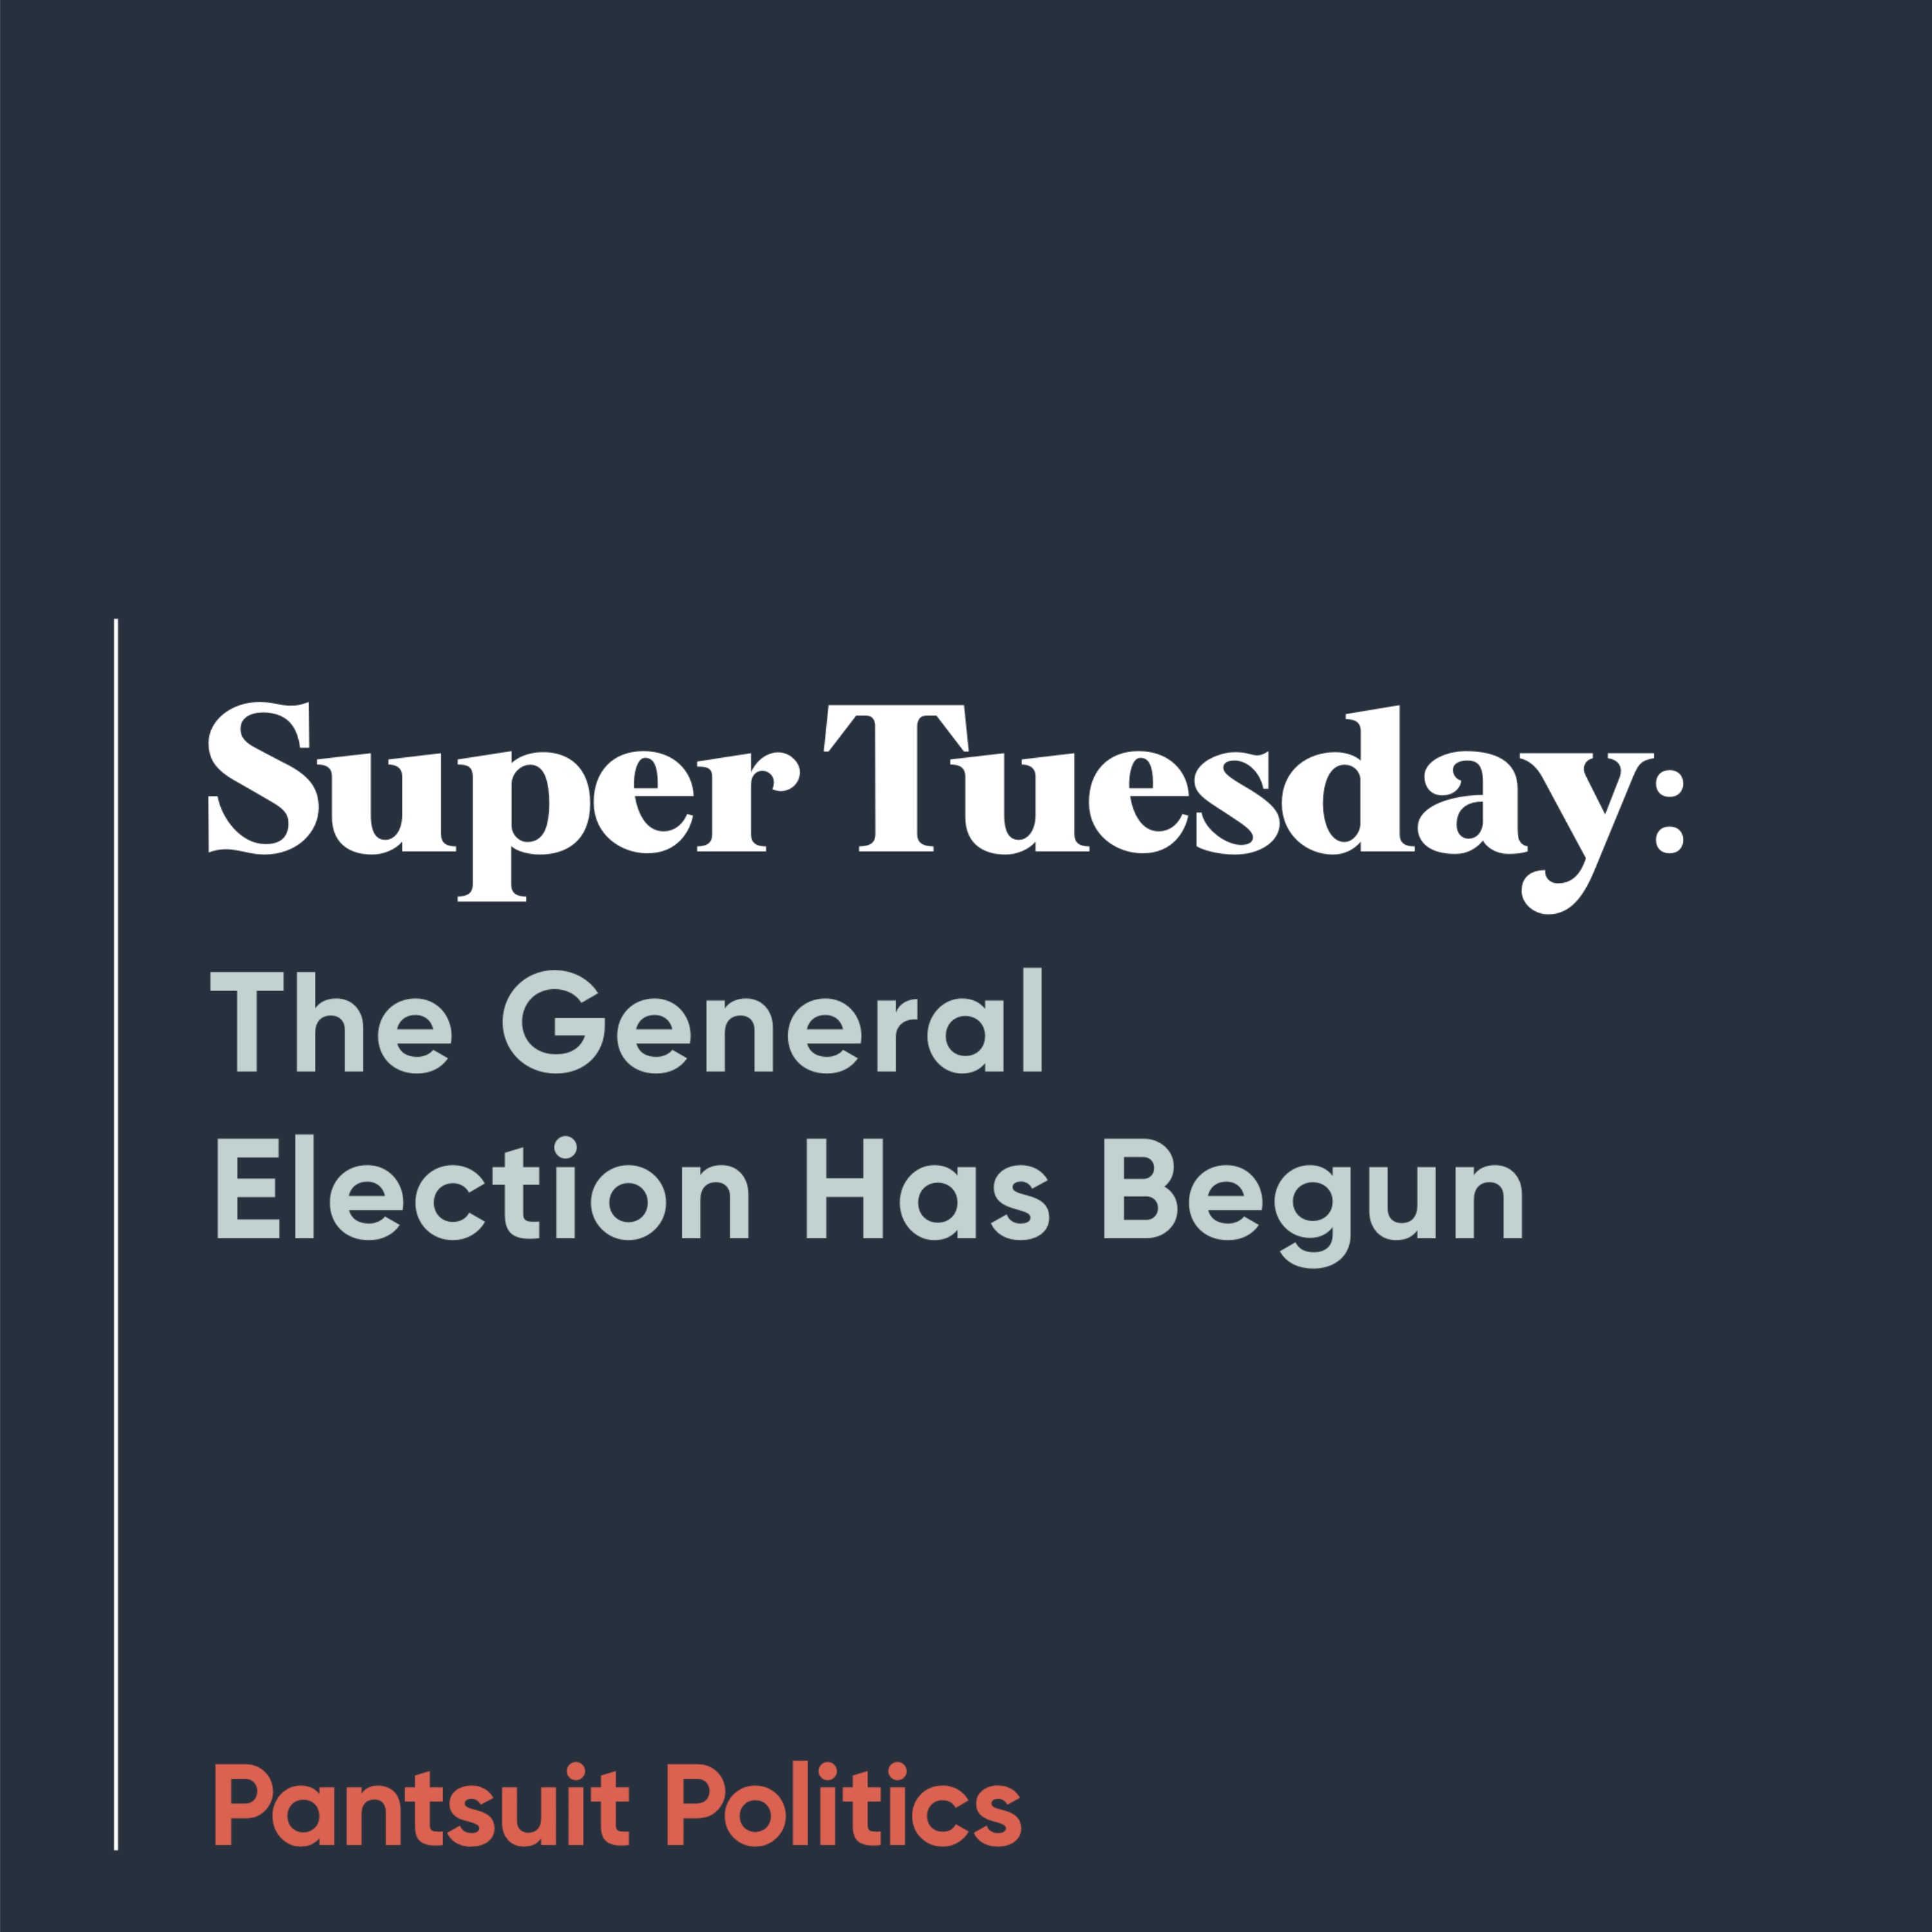 Super Tuesday: The General Election Has Begun